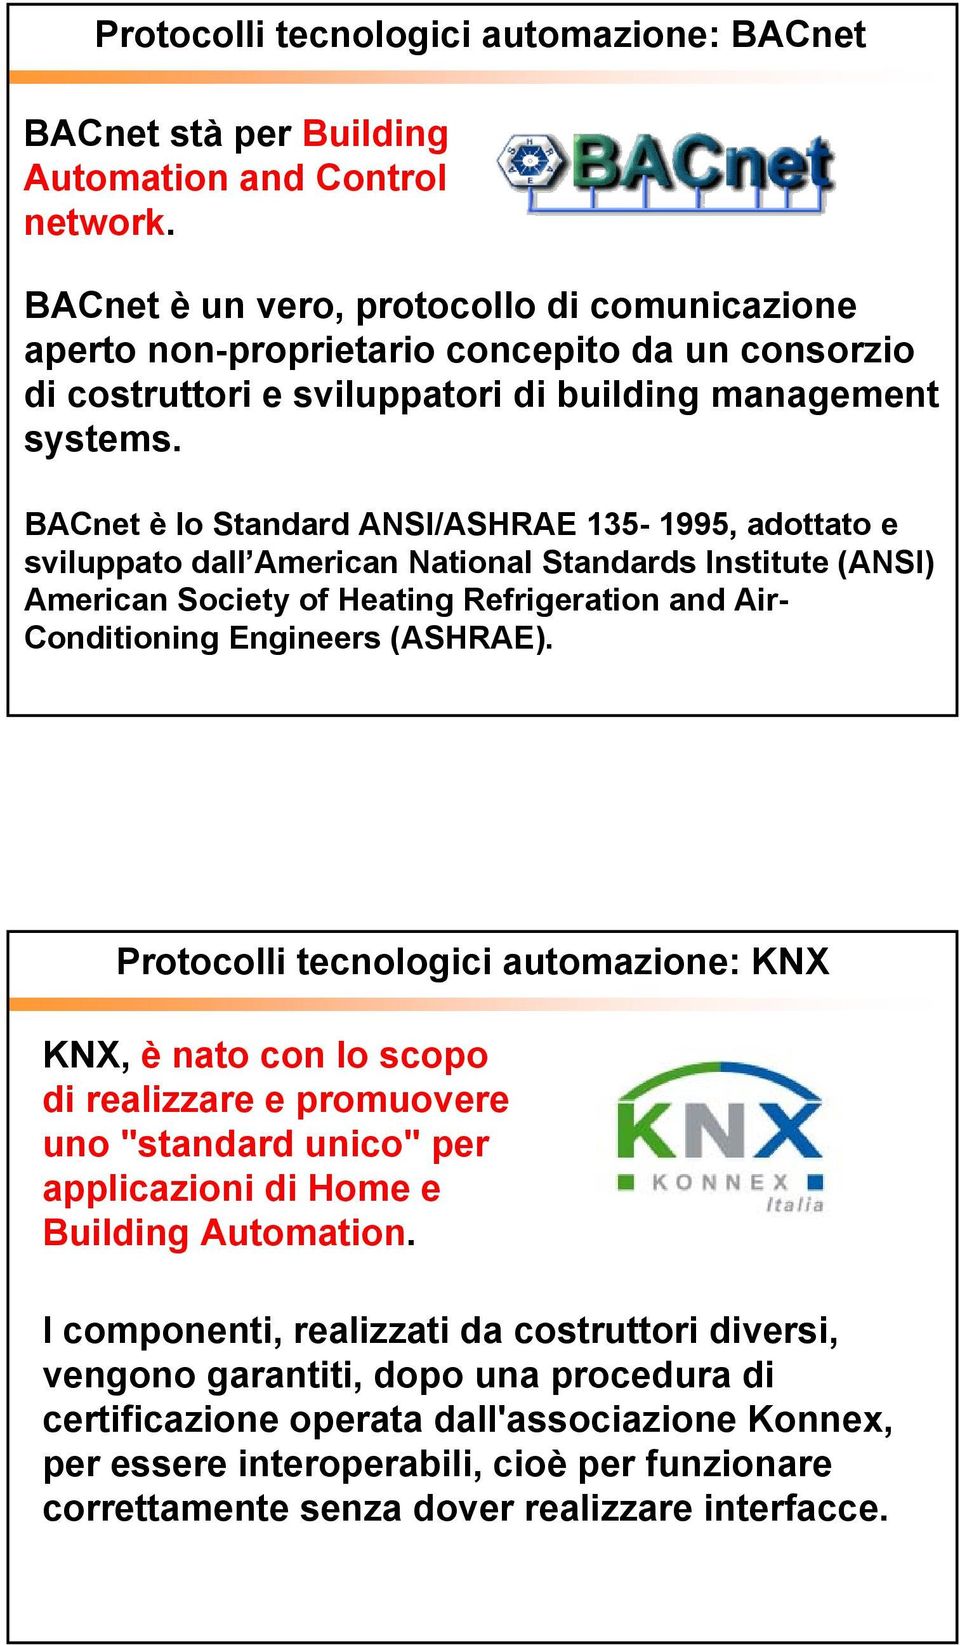 BACnet è lo Standard ANSI/ASHRAE 135-1995, adottato e sviluppato dall American National Standards Institute (ANSI) American Society of Heating Refrigeration and Air- Conditioning Engineers (ASHRAE).